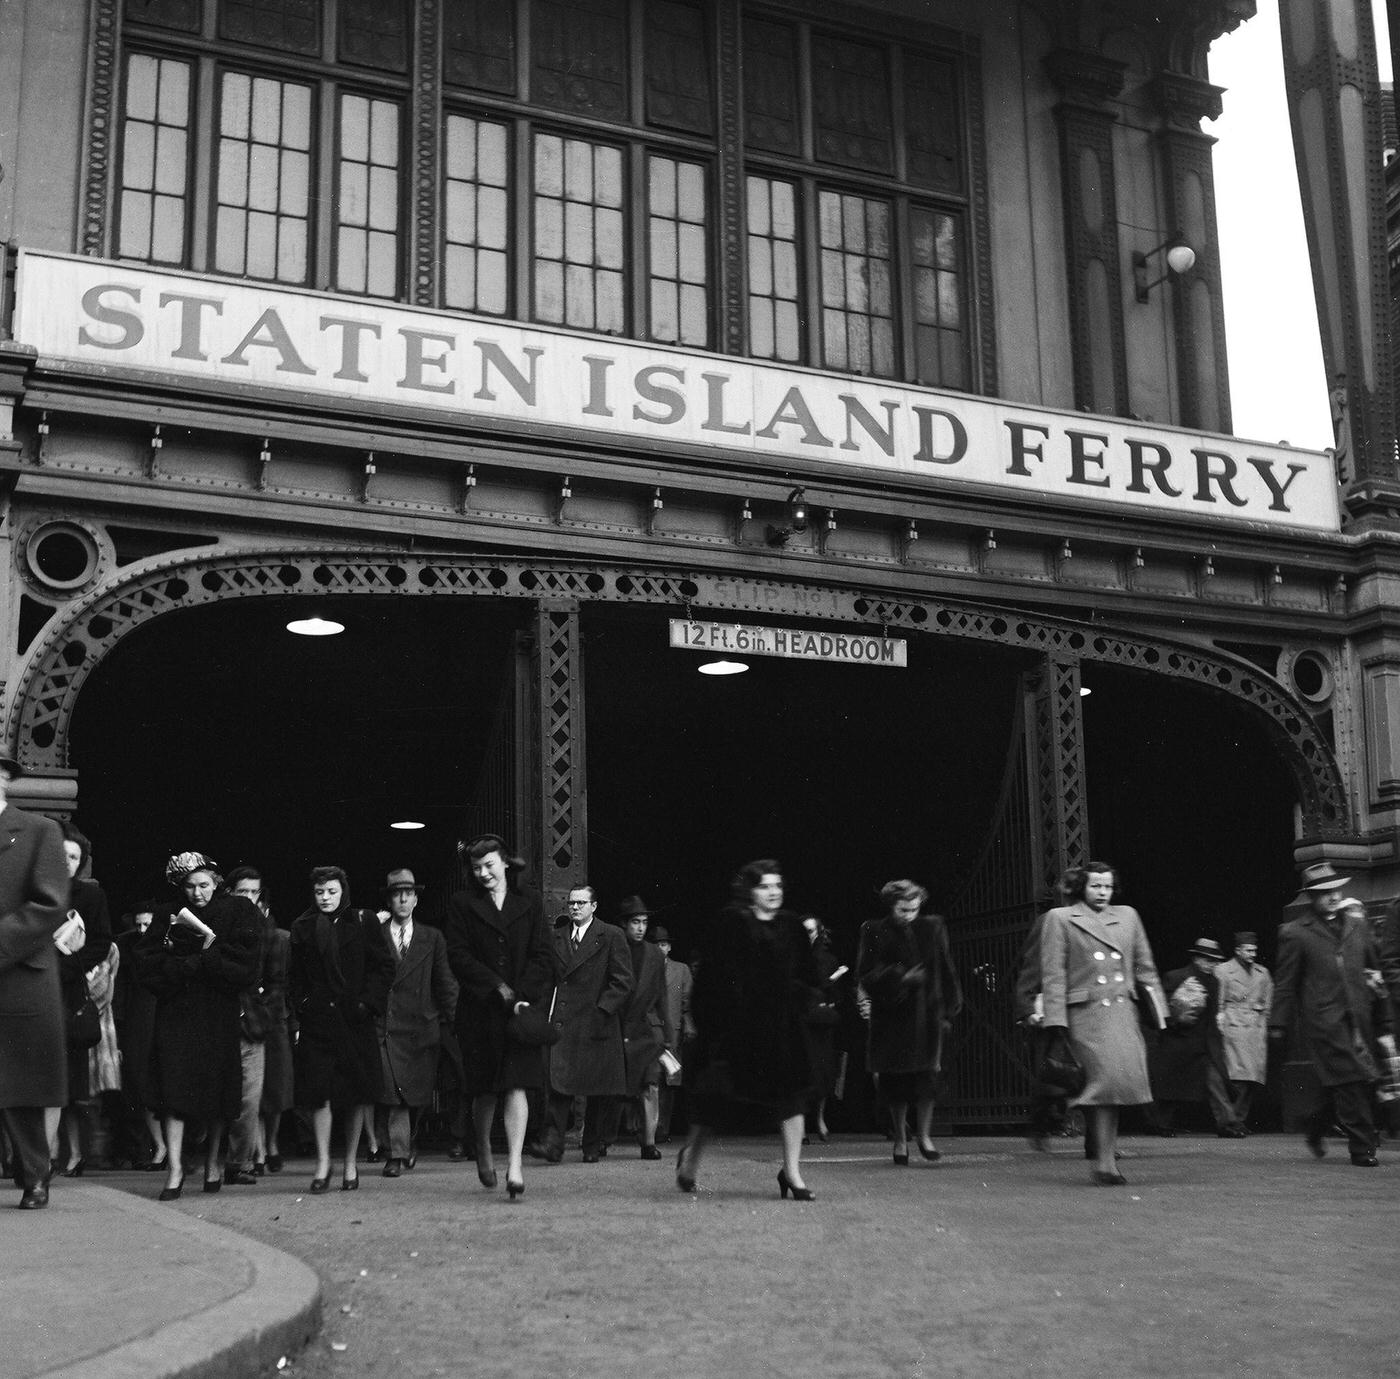 Passengers Depart From The Staten Island Ferry Terminal, 1948.